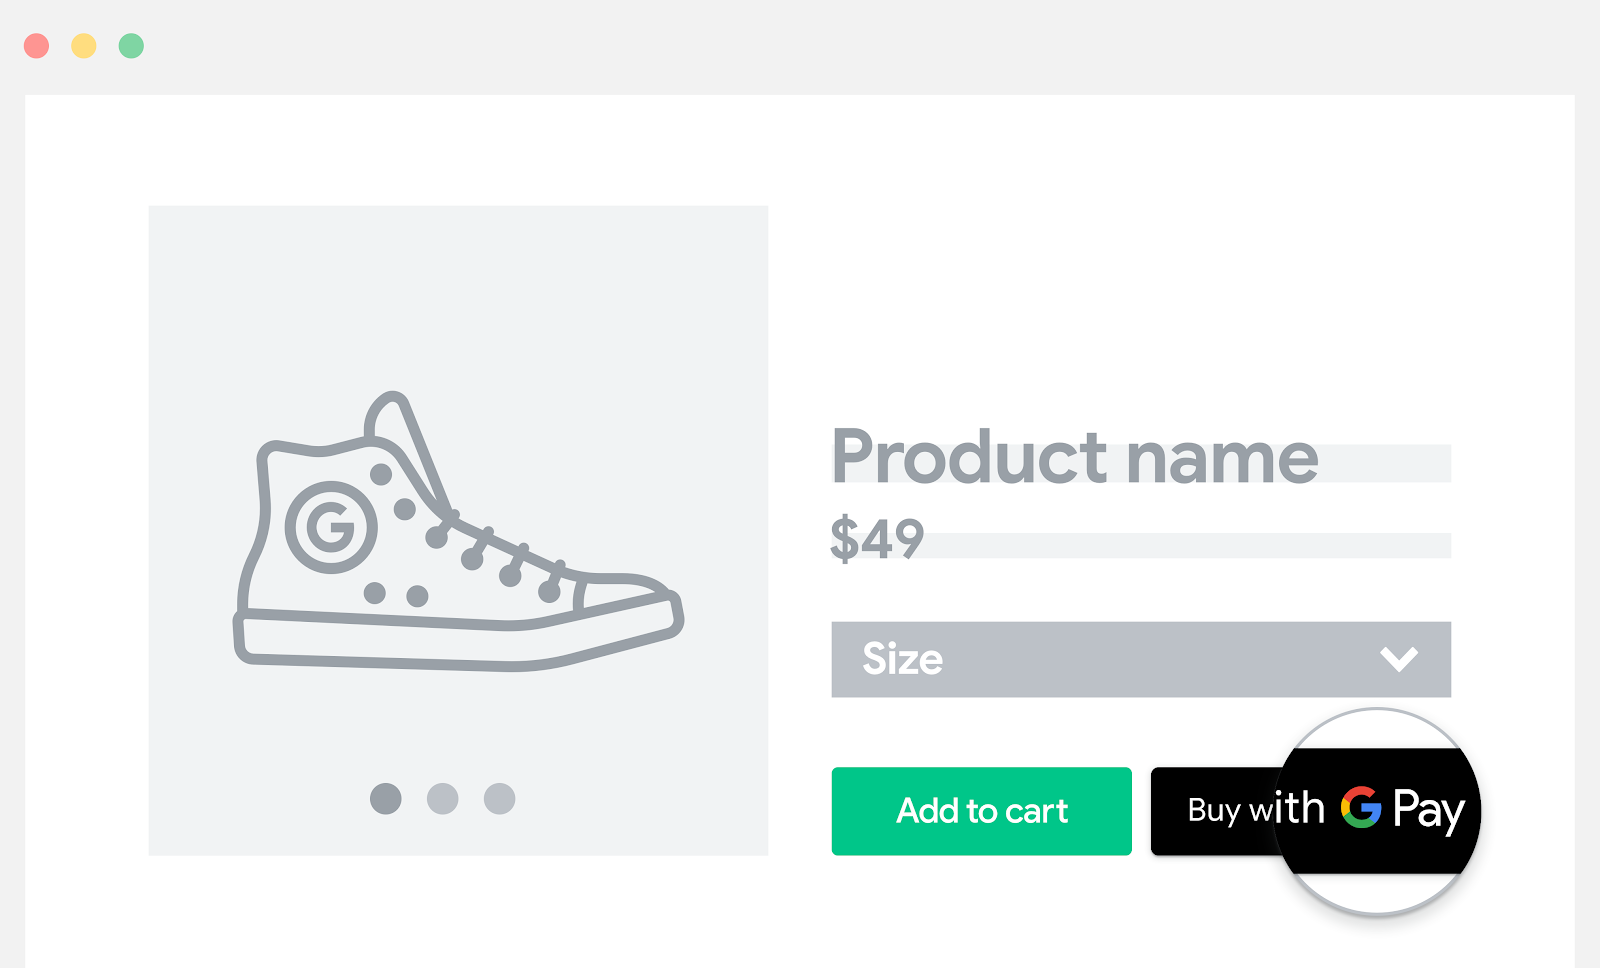 Add Google Pay to the product page.